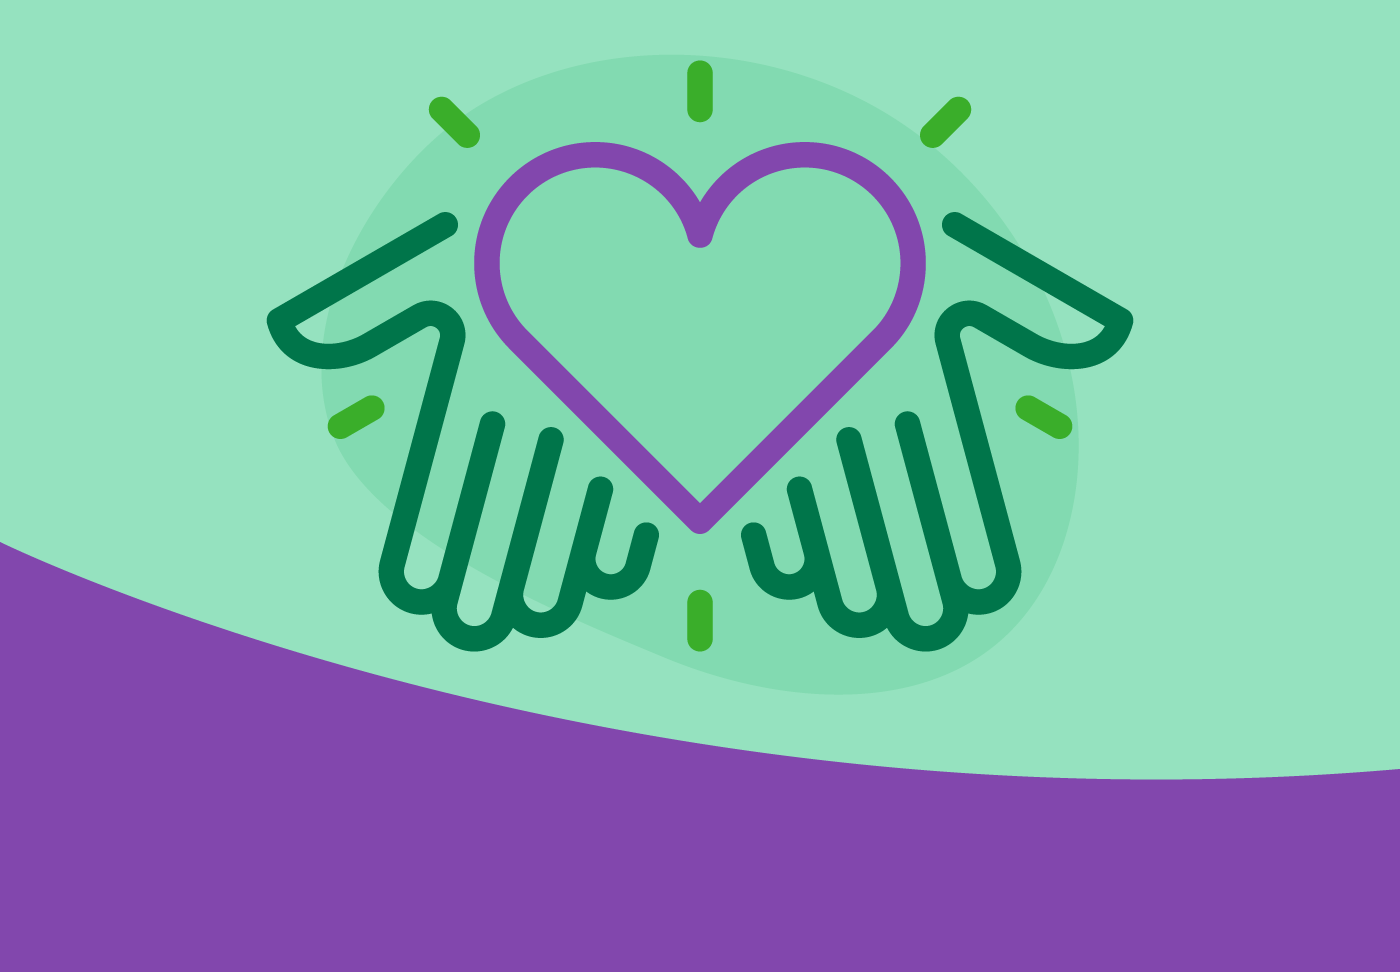 Illustration of hands holding heart. Lown Institute Hospitals Index and Wellstar logos.